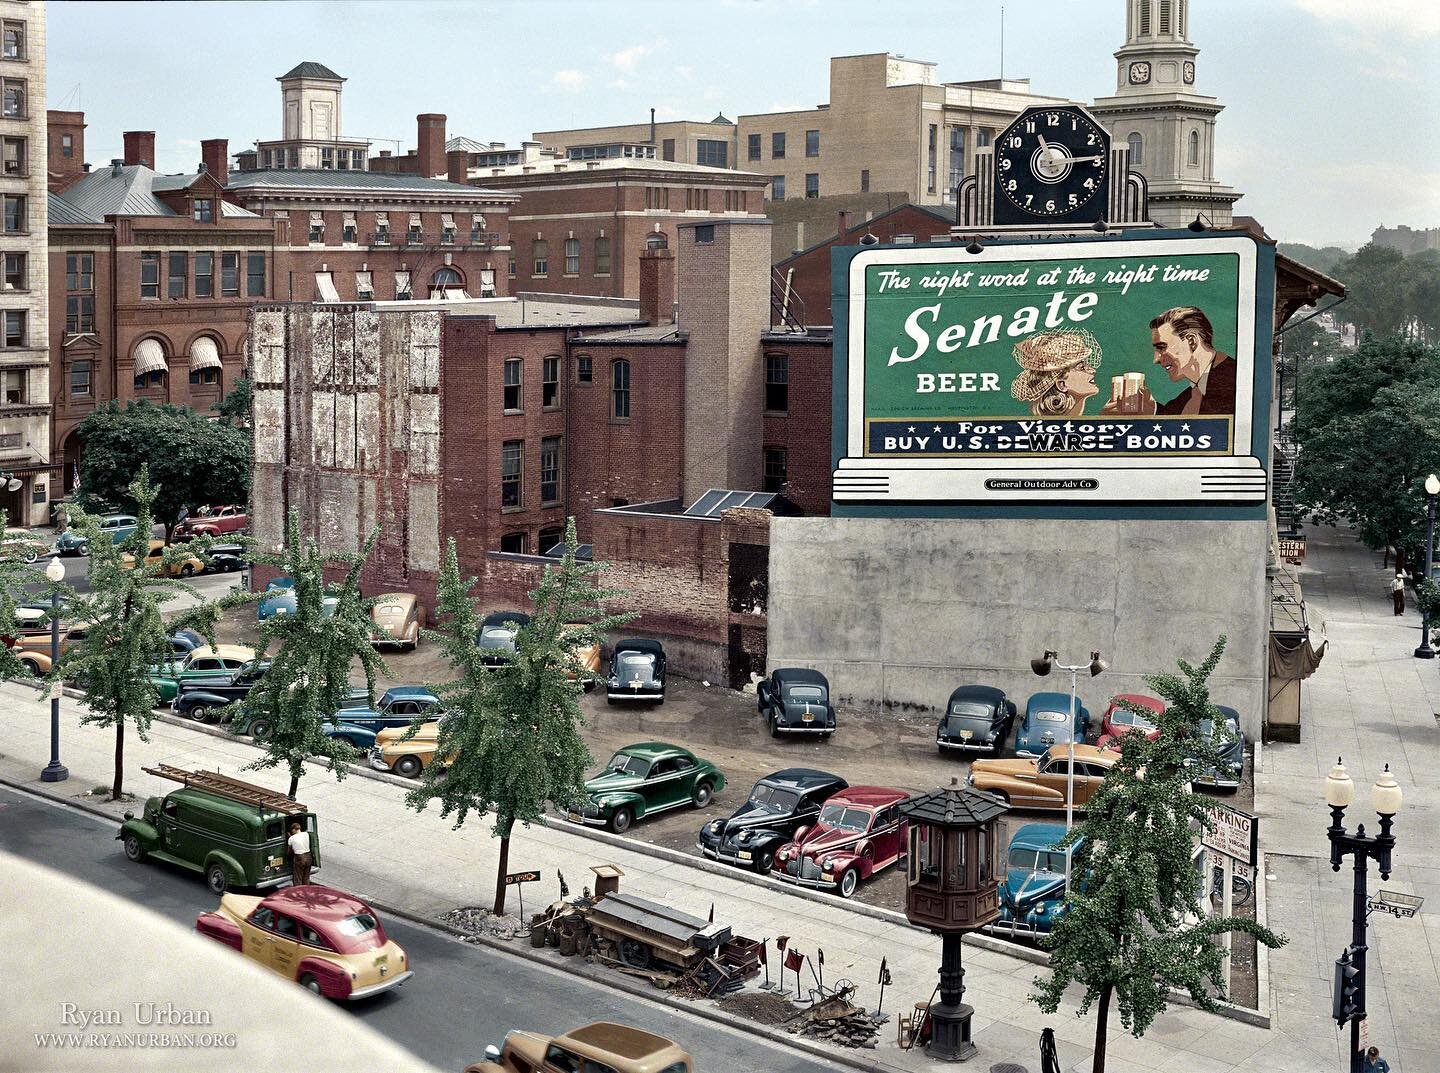 A (colorized) photo just a little older than our historic recipe! &ldquo;Senate Beer Ad. New York Ave NW &amp; 14th St NW, DC 1942&rdquo;

📸 @urban2487 &amp; @librarycongress